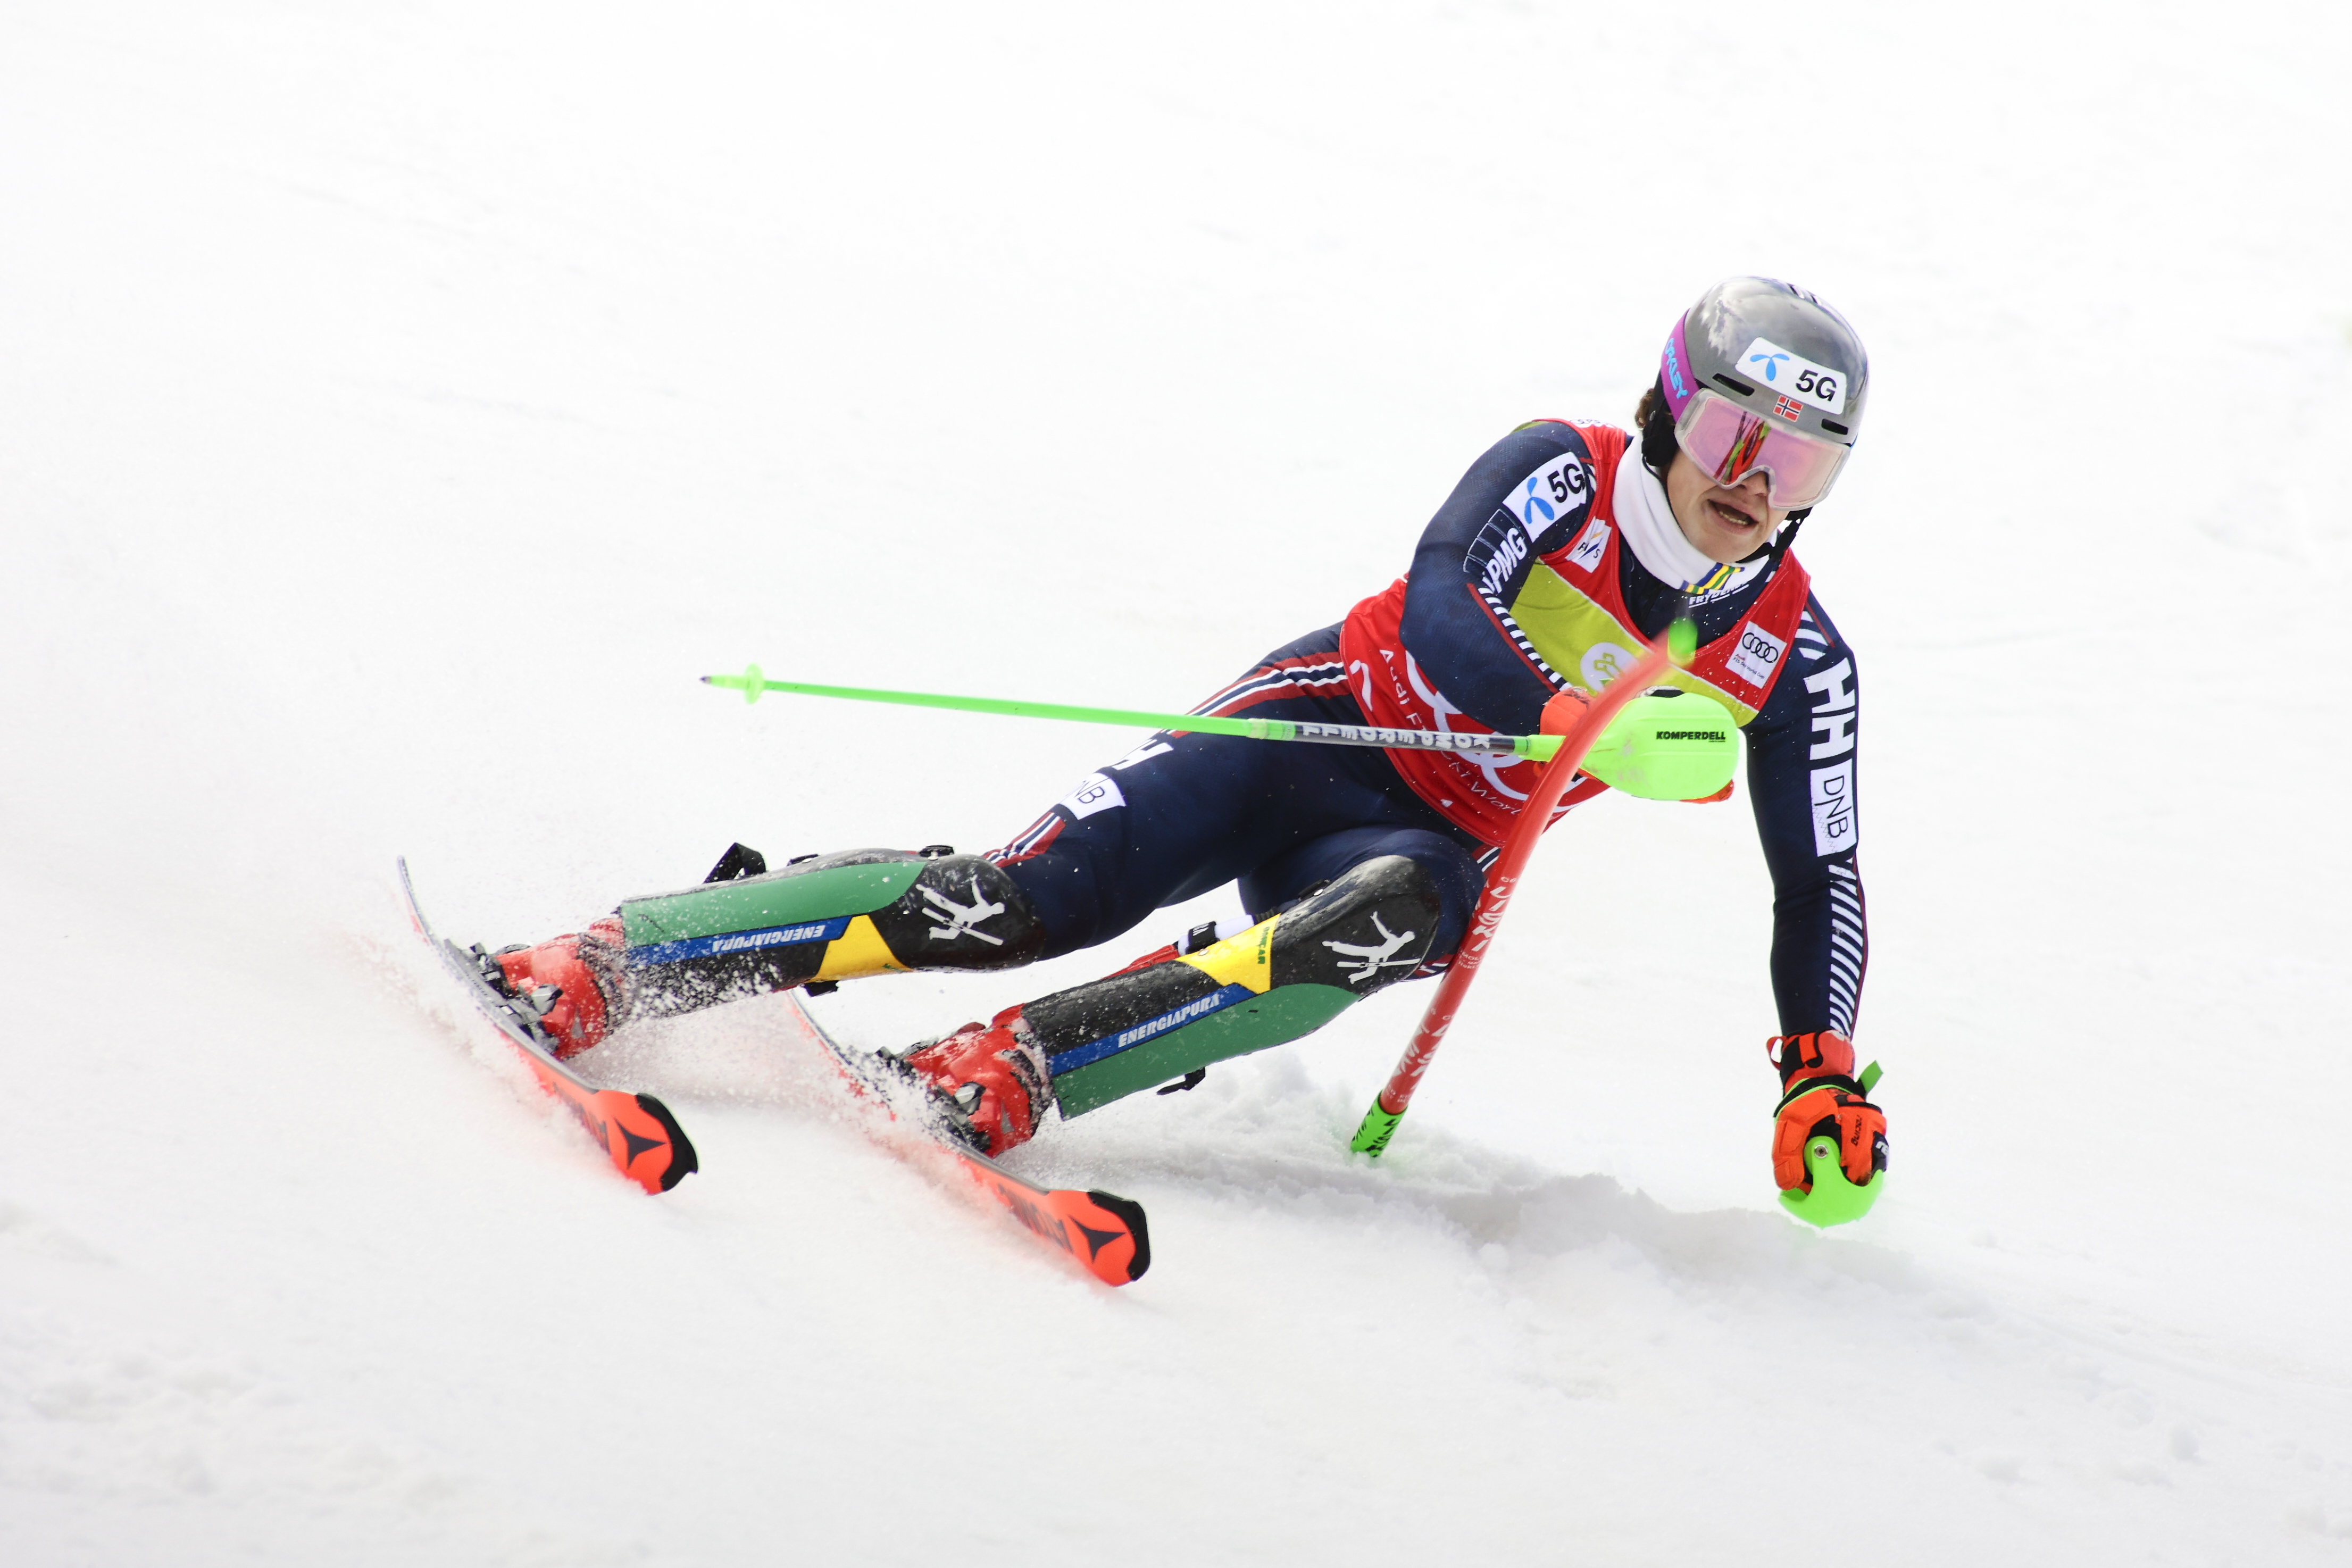 Lucas Braathen of Norway competes in the men's slalom event at the  International Ski Federation Alpine Ski World Cup in Soldeu, Andorra, March 19, 2023. /CFP